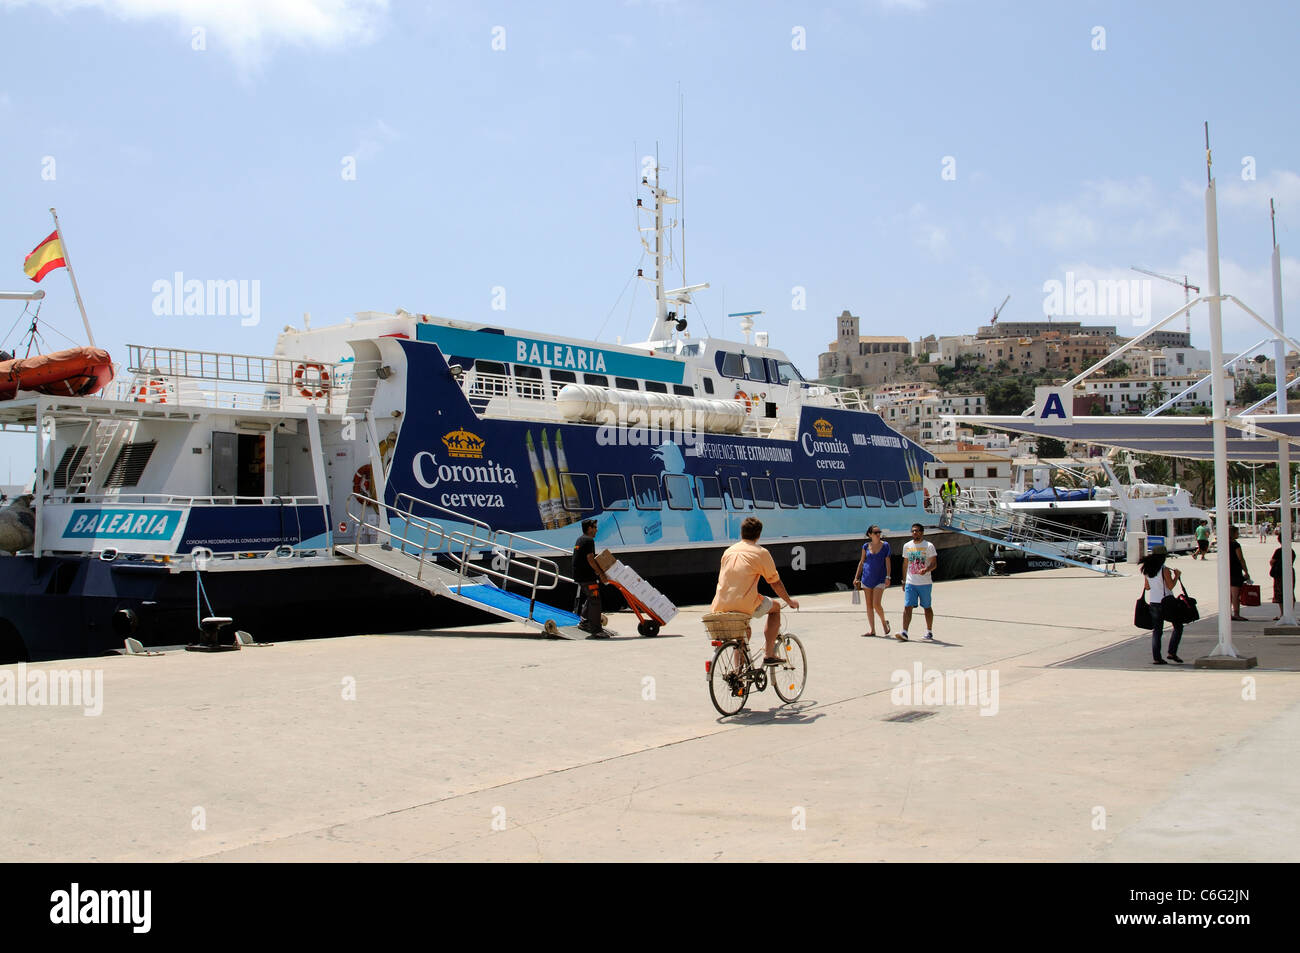 Inter island ferries berthed on the quayside overlooked by the historic old town of Eivissa on the Spanish Island of Ibiza Stock Photo